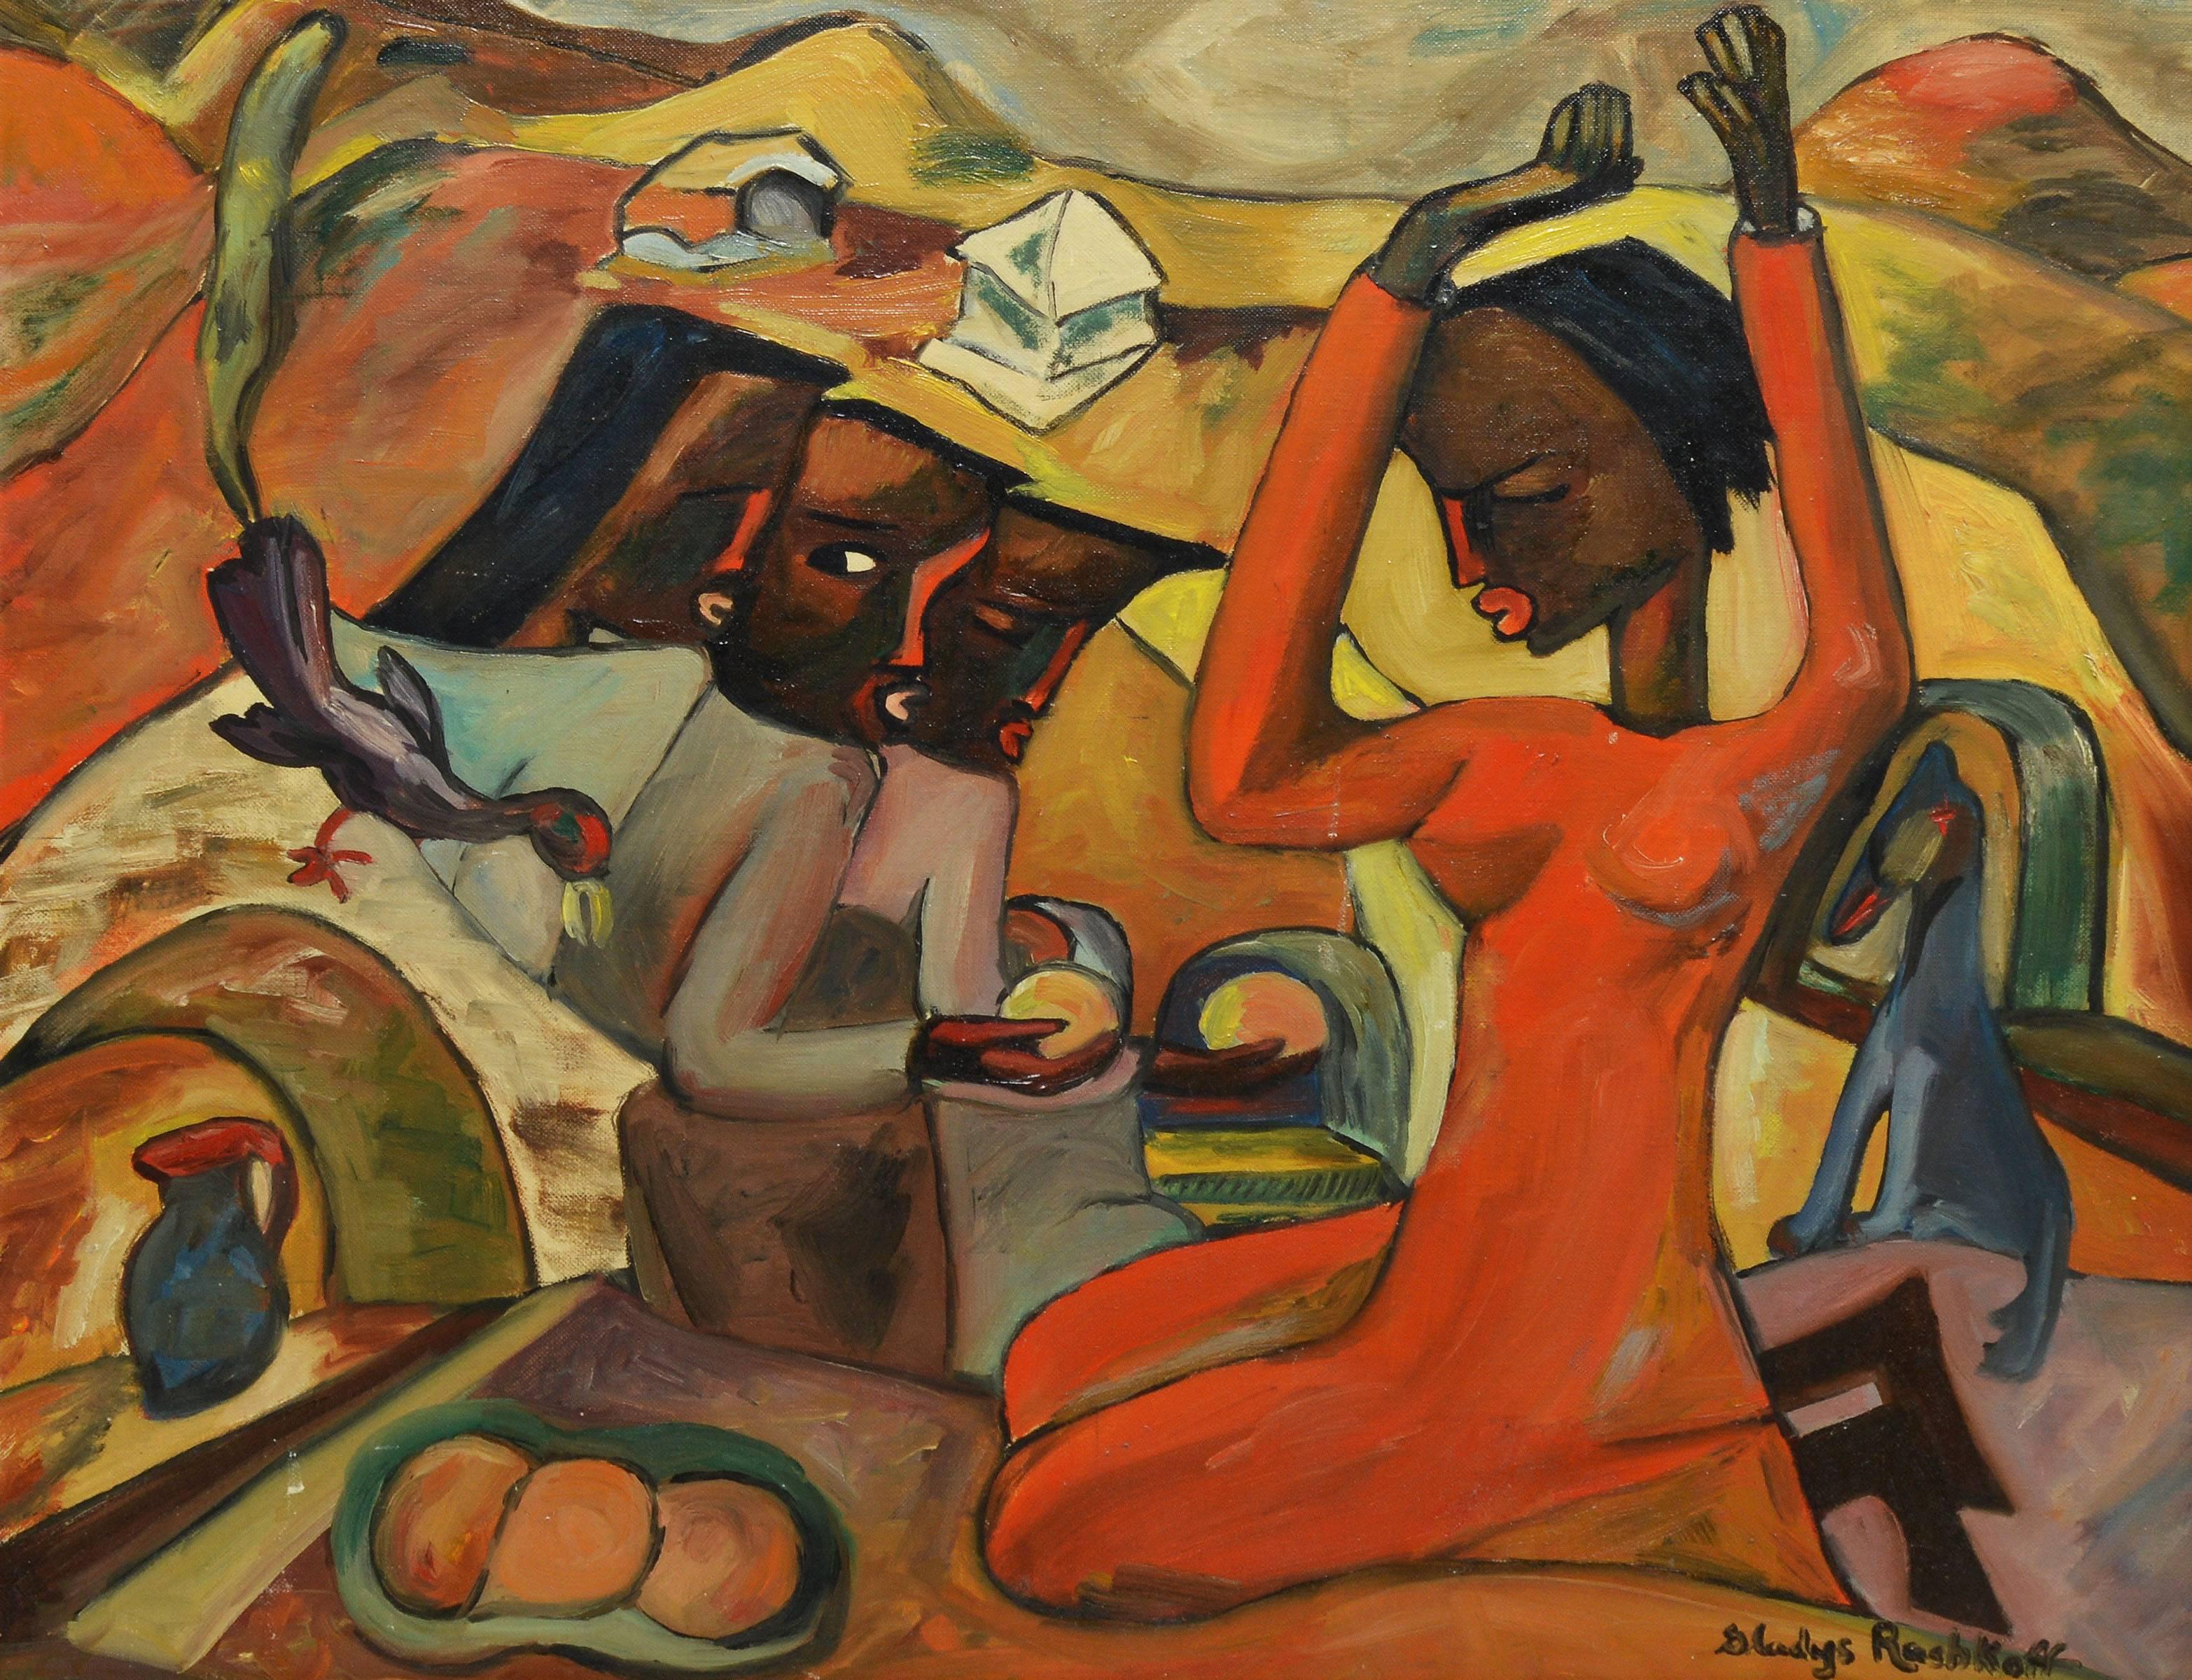 Tropical Landscape with Figures - Modern Painting by Gladys Rashkoff